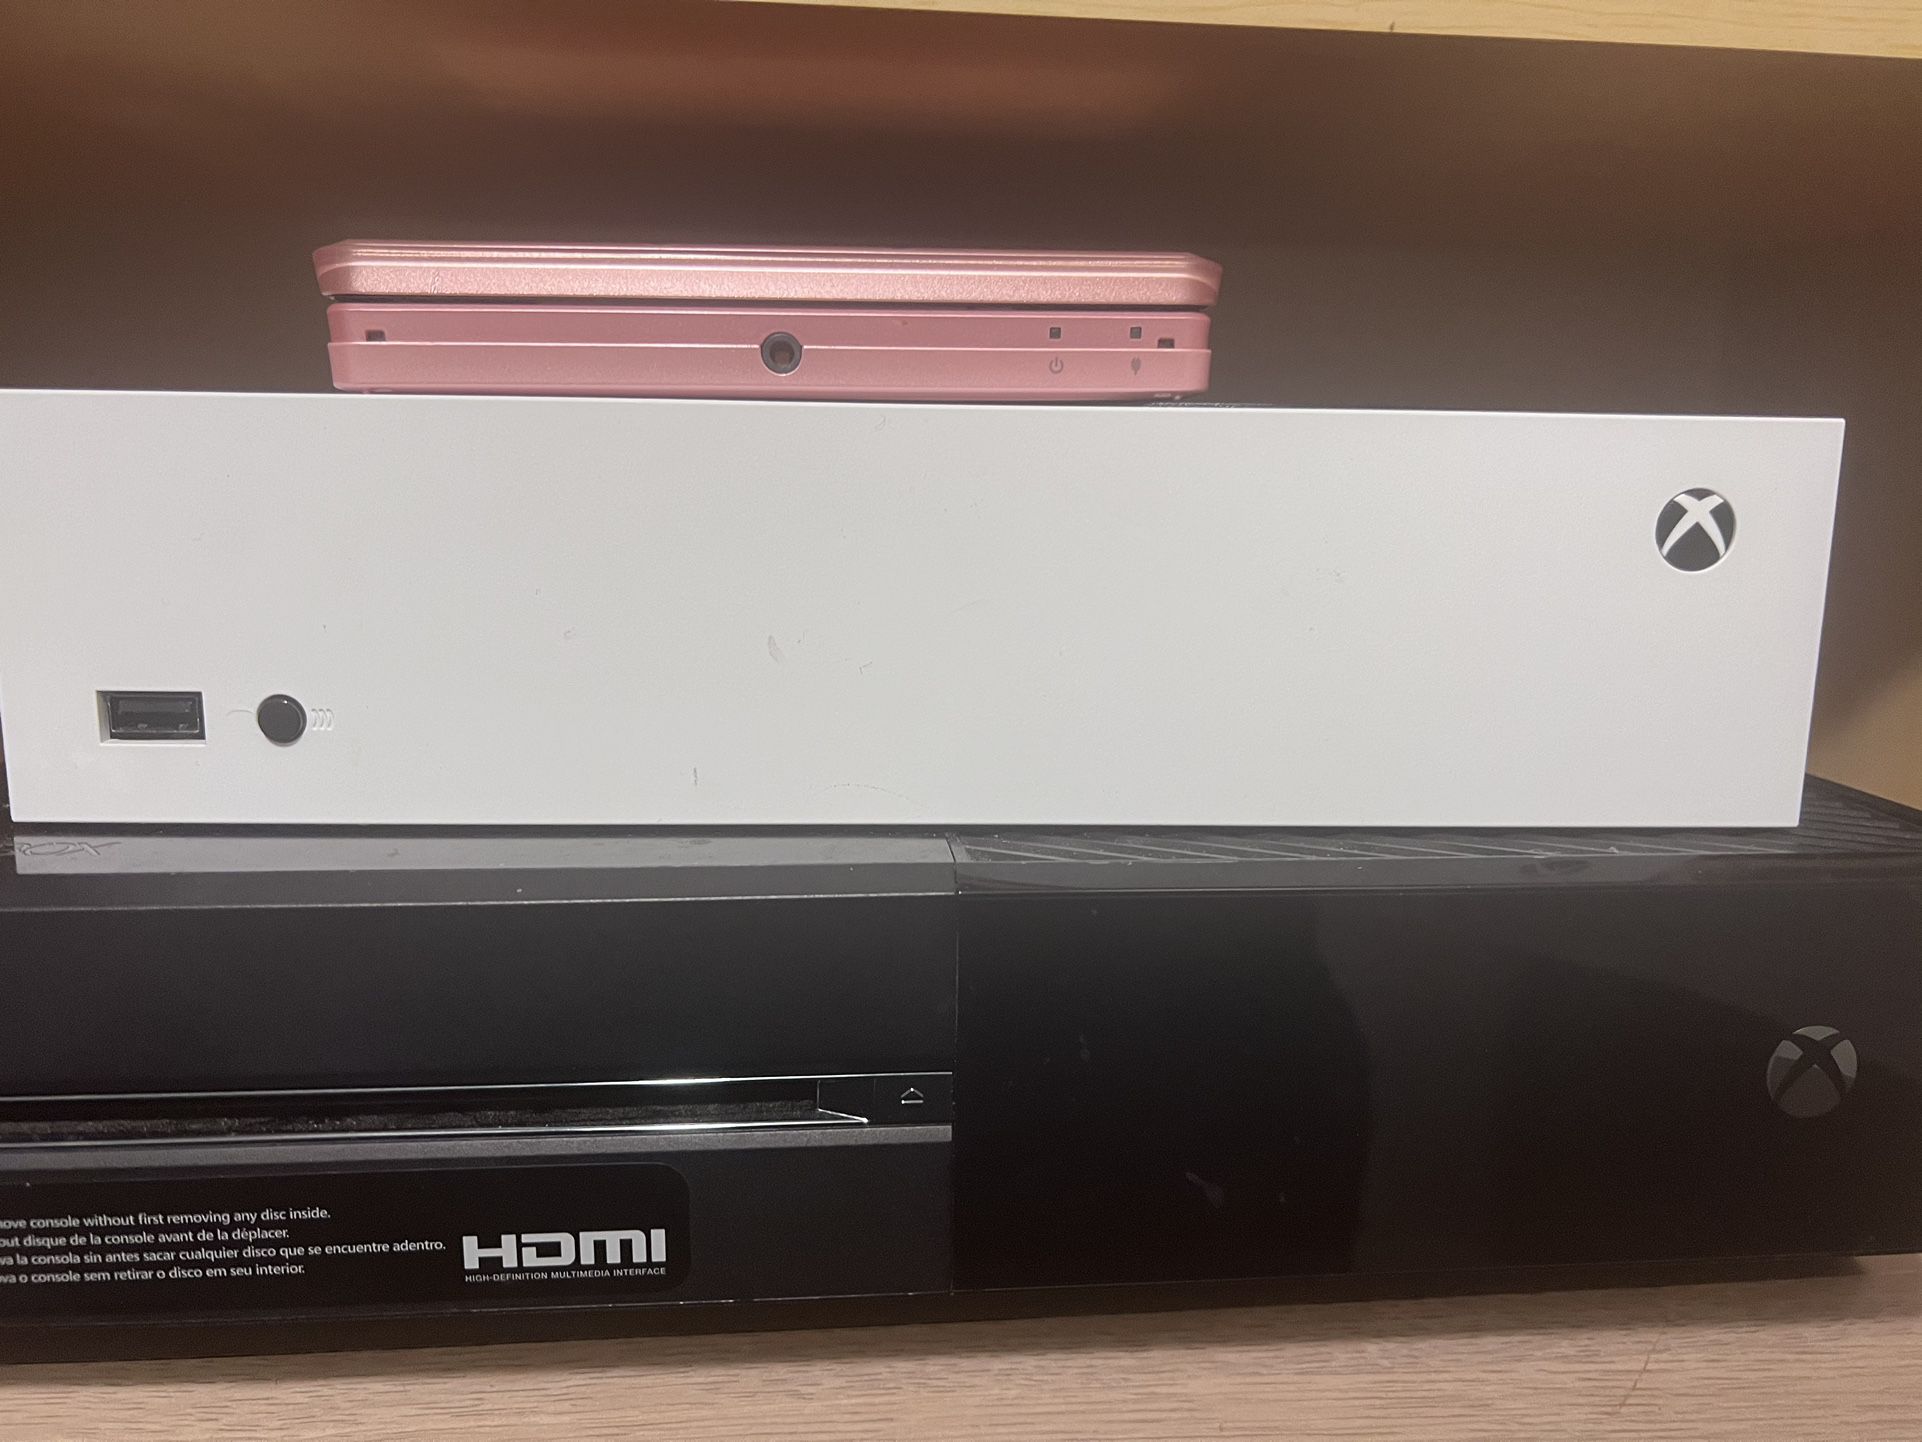 Japanese 3ds, Series S, And Xbox One